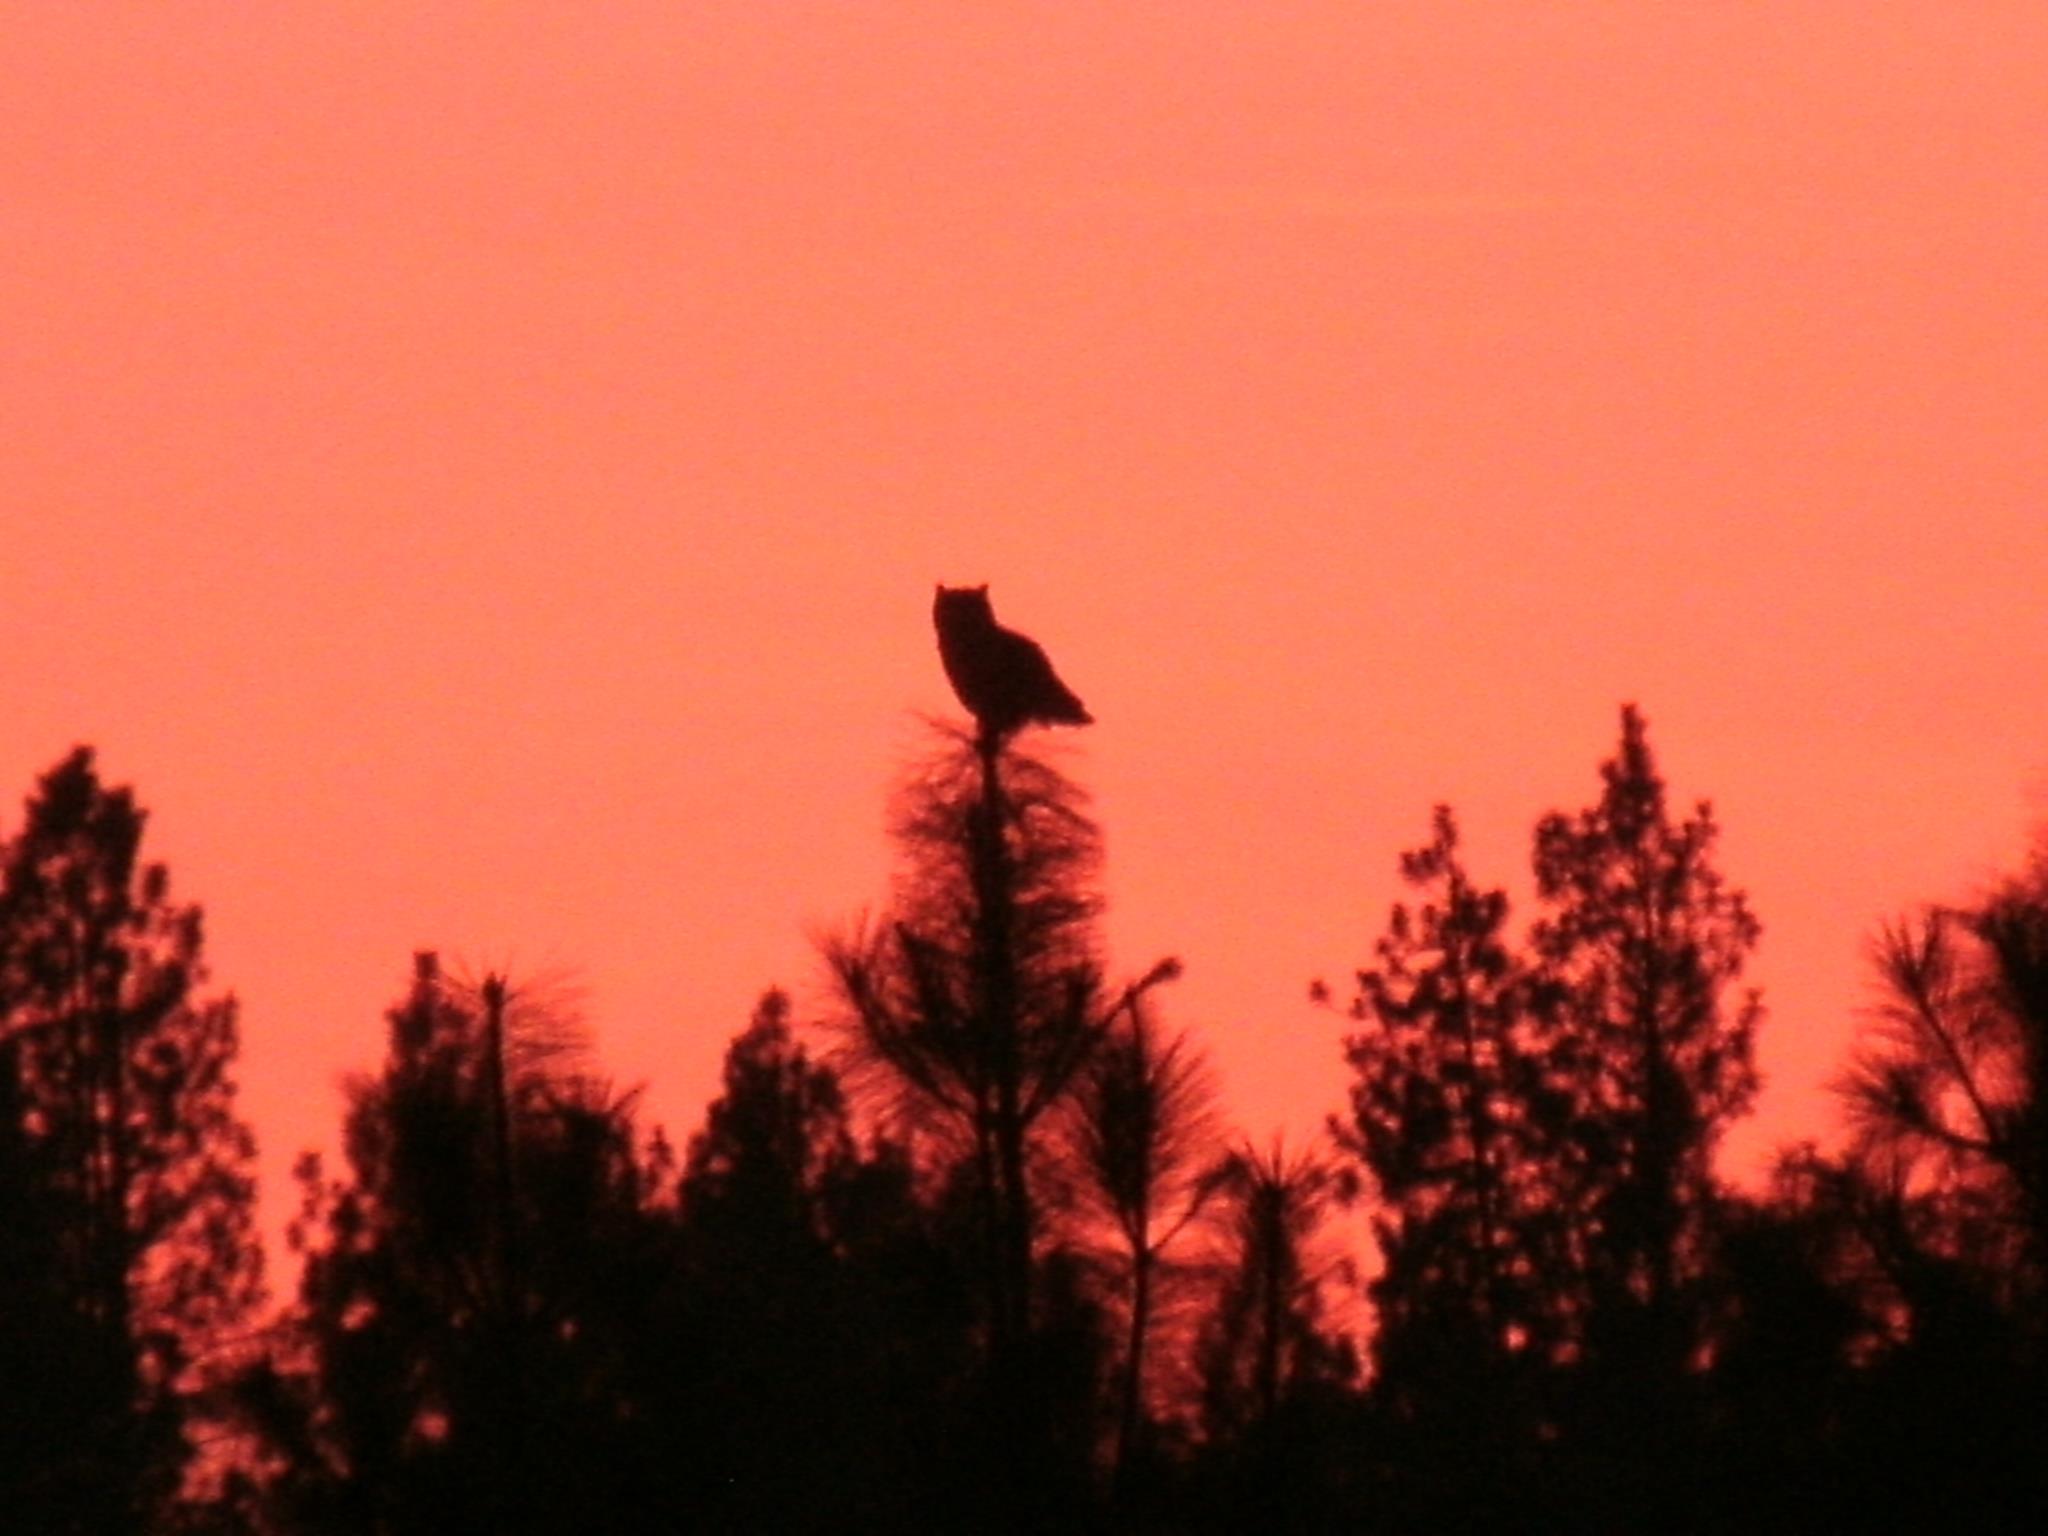 An owl in the top of a tree as the sun goes down